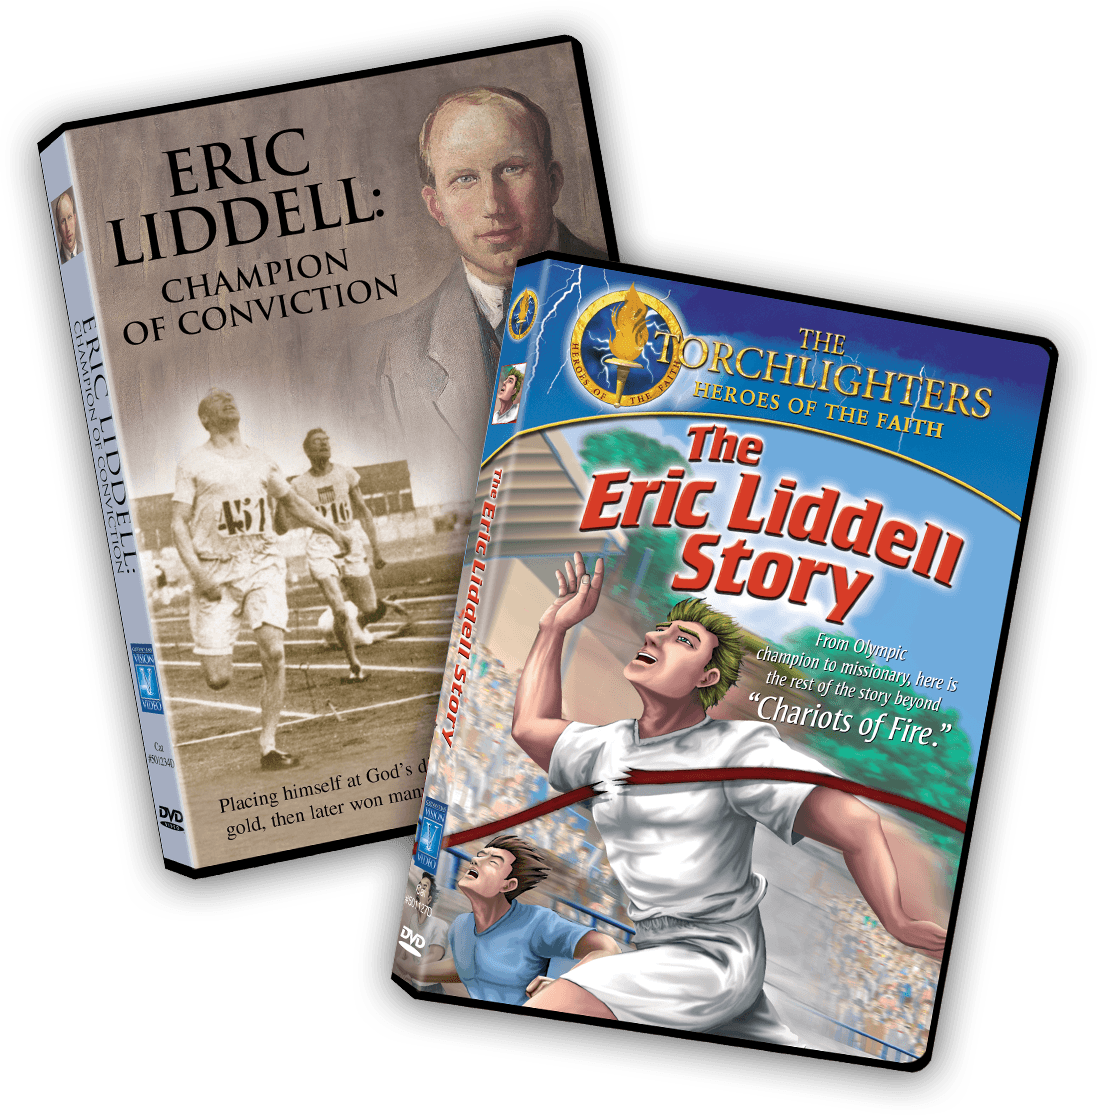 Two DVDs: The Eric Liddell Story and Eric Liddell: Champion of Conviction